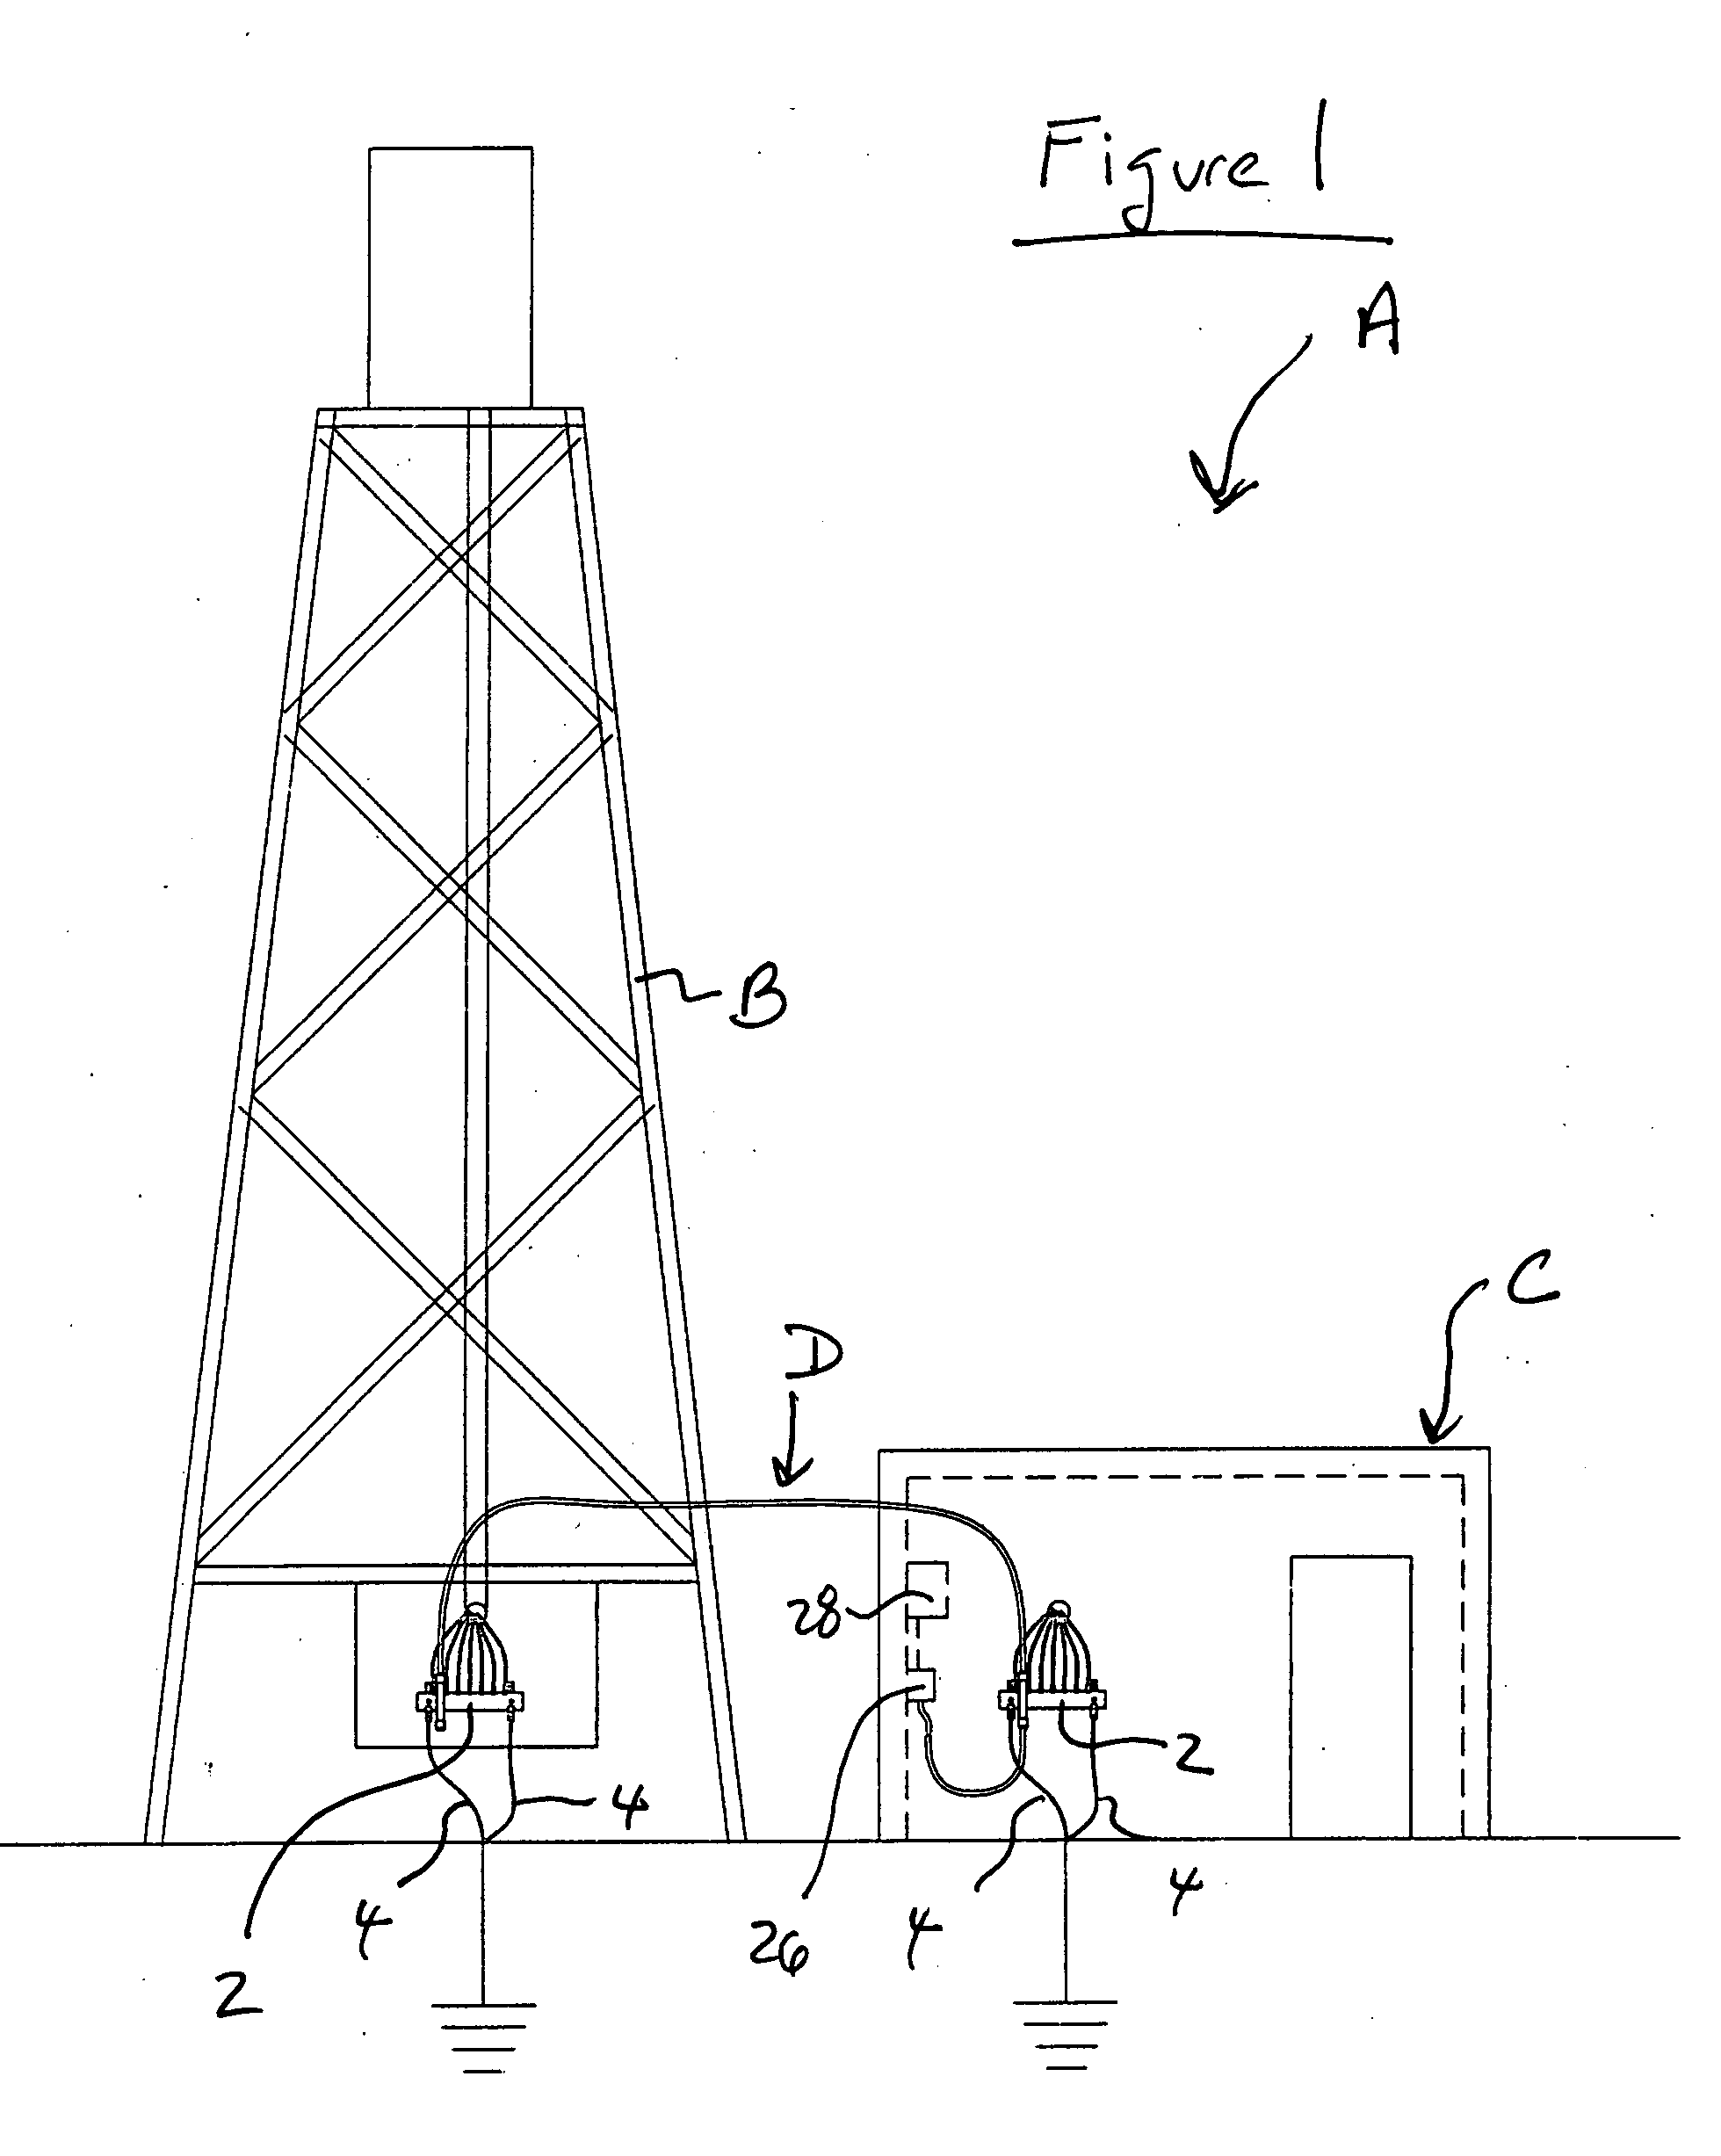 Apparatus and method for monitoring a component of a wireless communication network to determine whether the component has been tampered with, disabled and/or removed